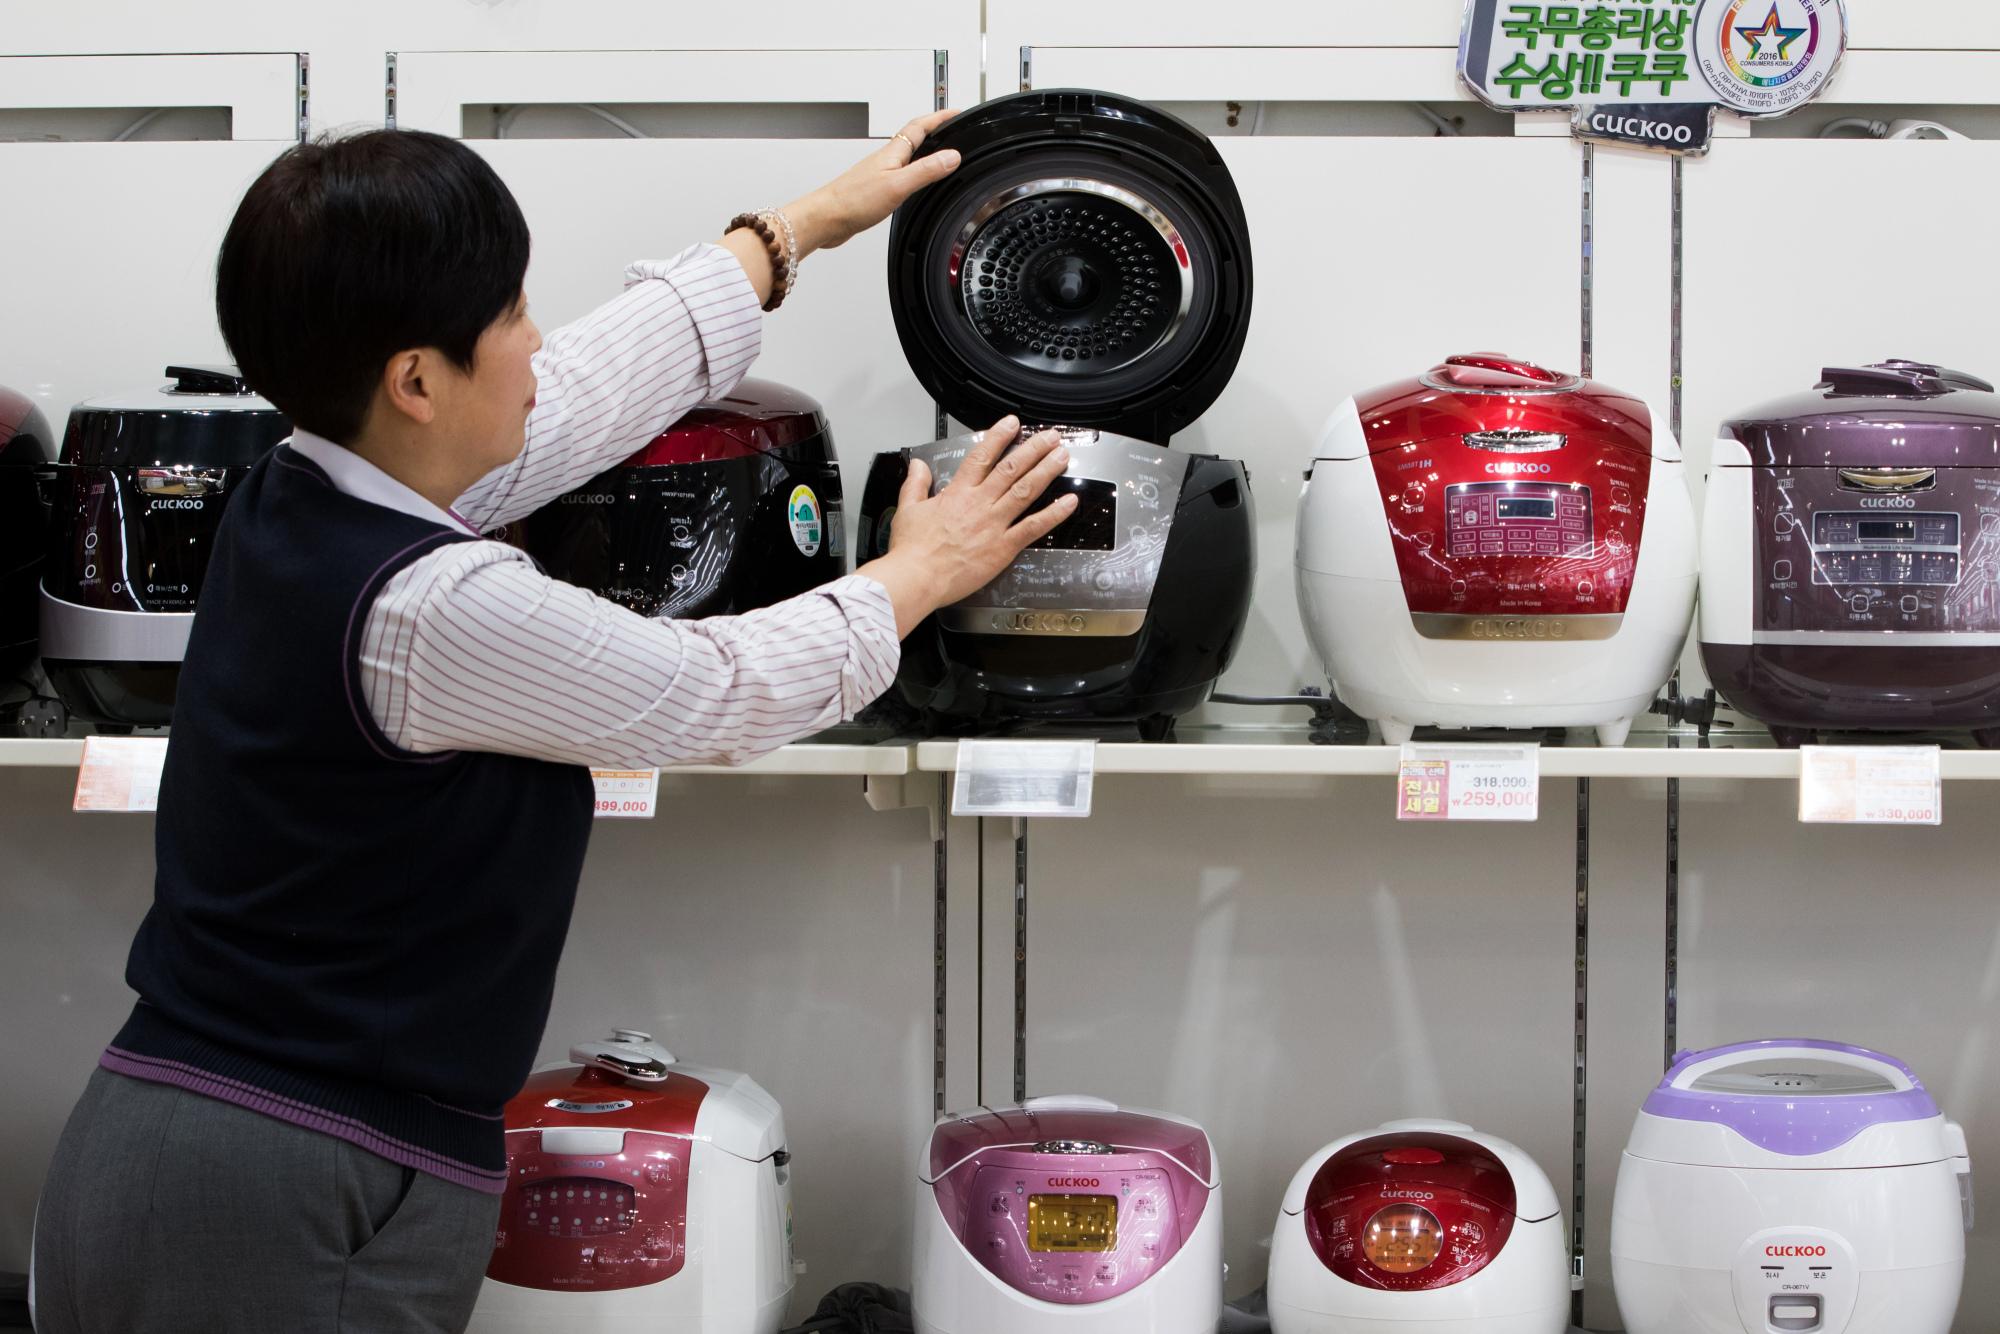 Billionaire Rises as Asians Go Cuckoo for His Rice Cooker - Bloomberg